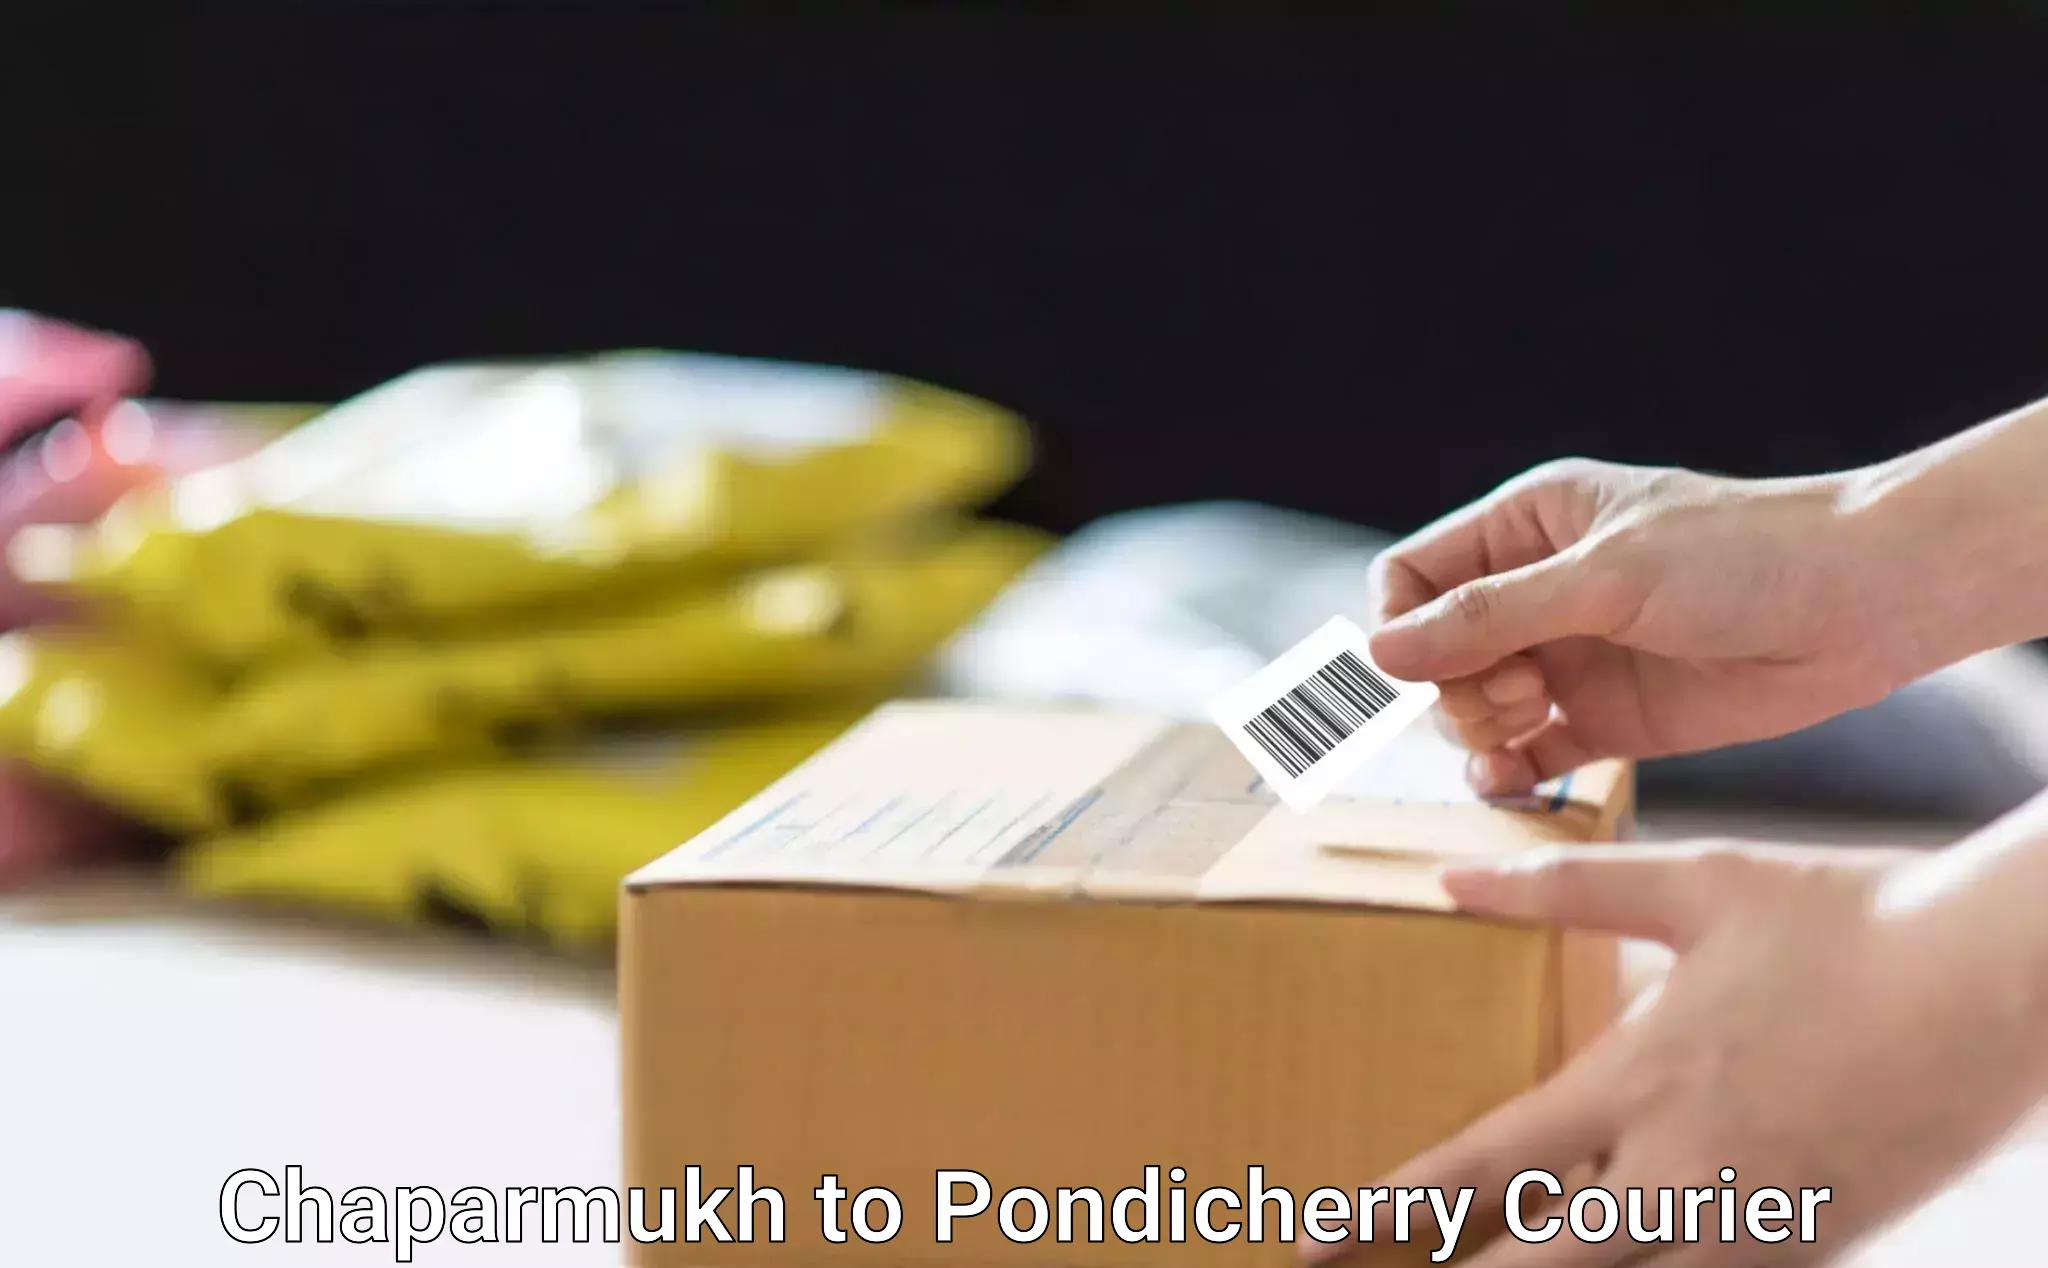 Courier services Chaparmukh to Pondicherry